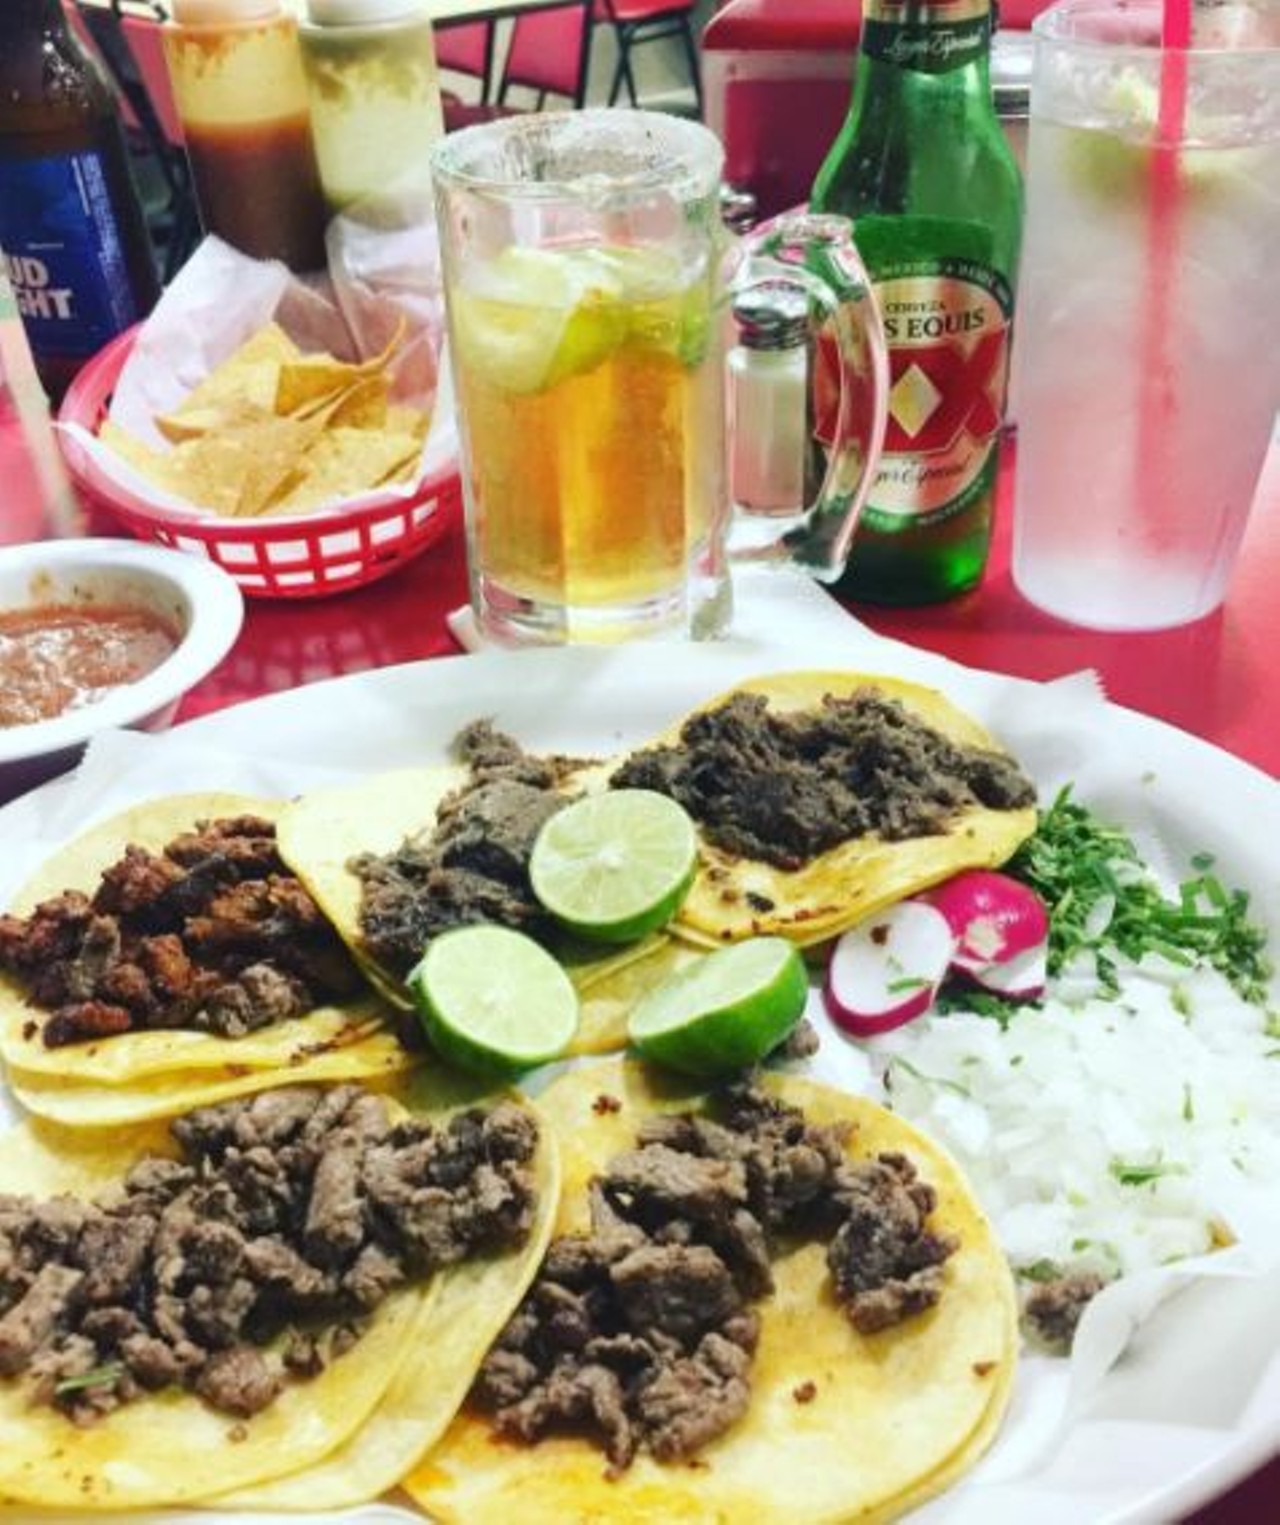 Los Cocos Fruteria Y Taqueria
1502 Bandera Rd., (210) 431-7786
Sit back and relax on the patio, be sure to order up a fruit cup and a plate of tacos first.
Photo via Instagram, pincherussian